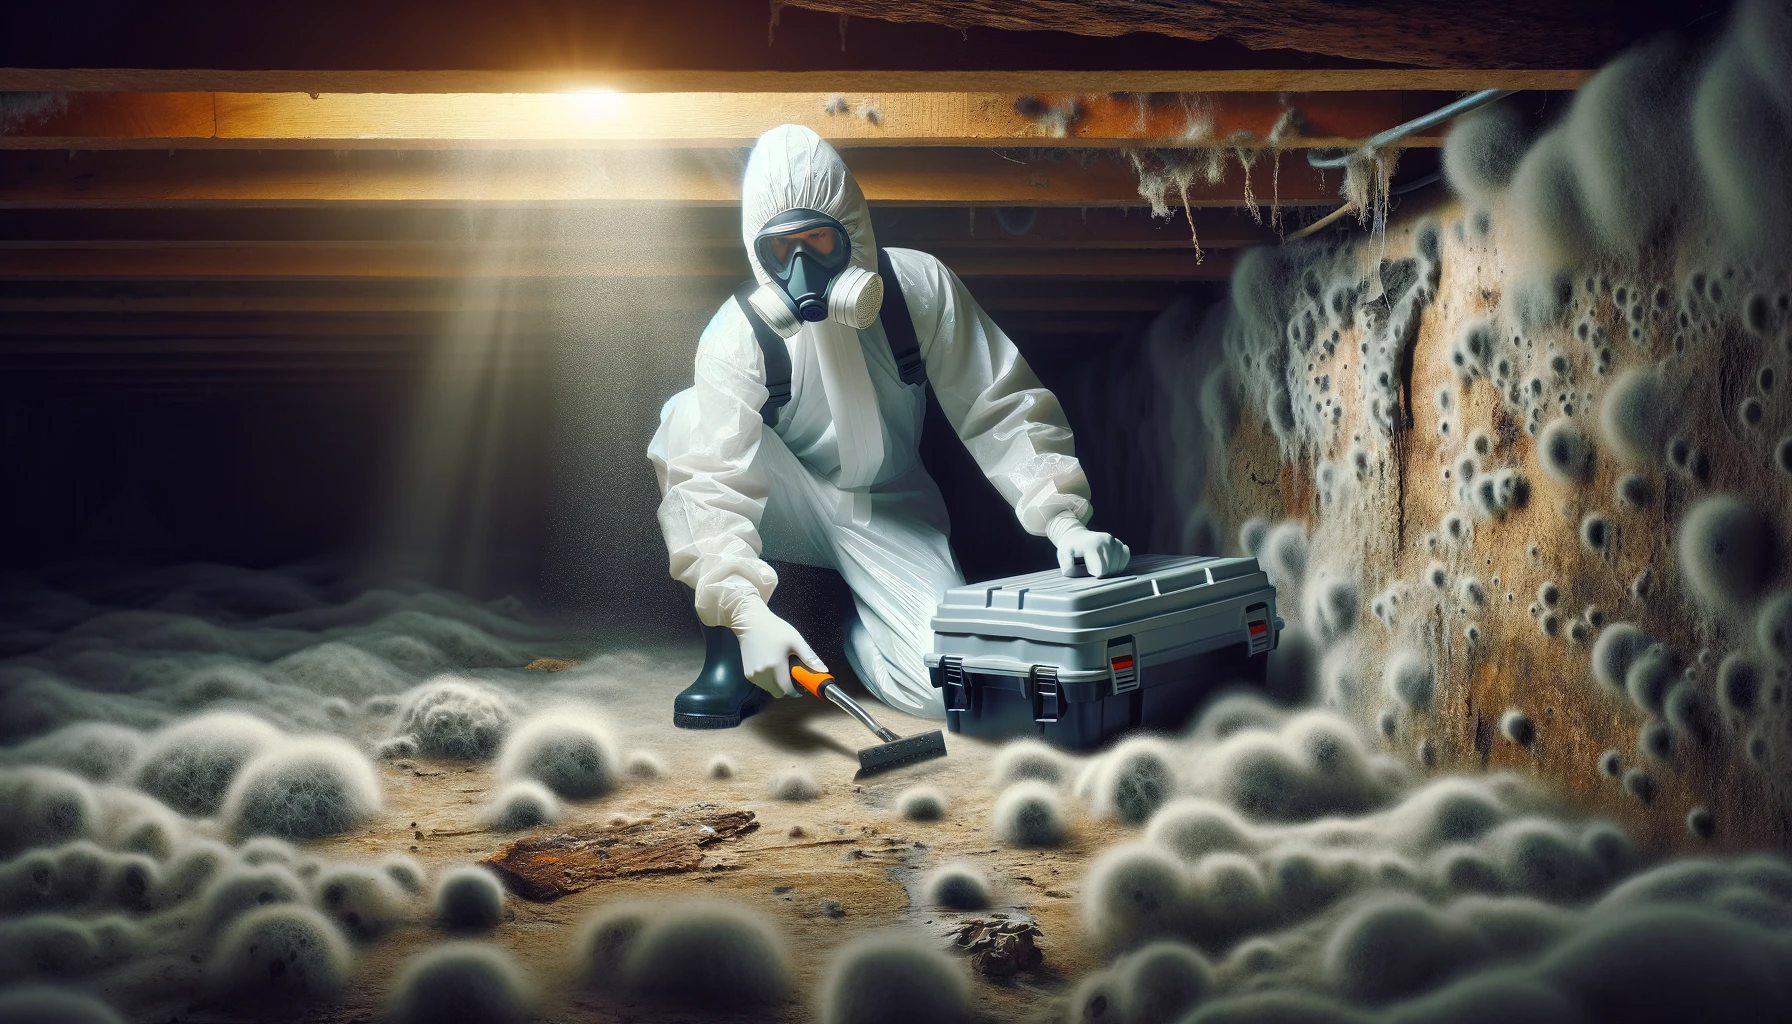 Crawlspace Mold removal performed by professional